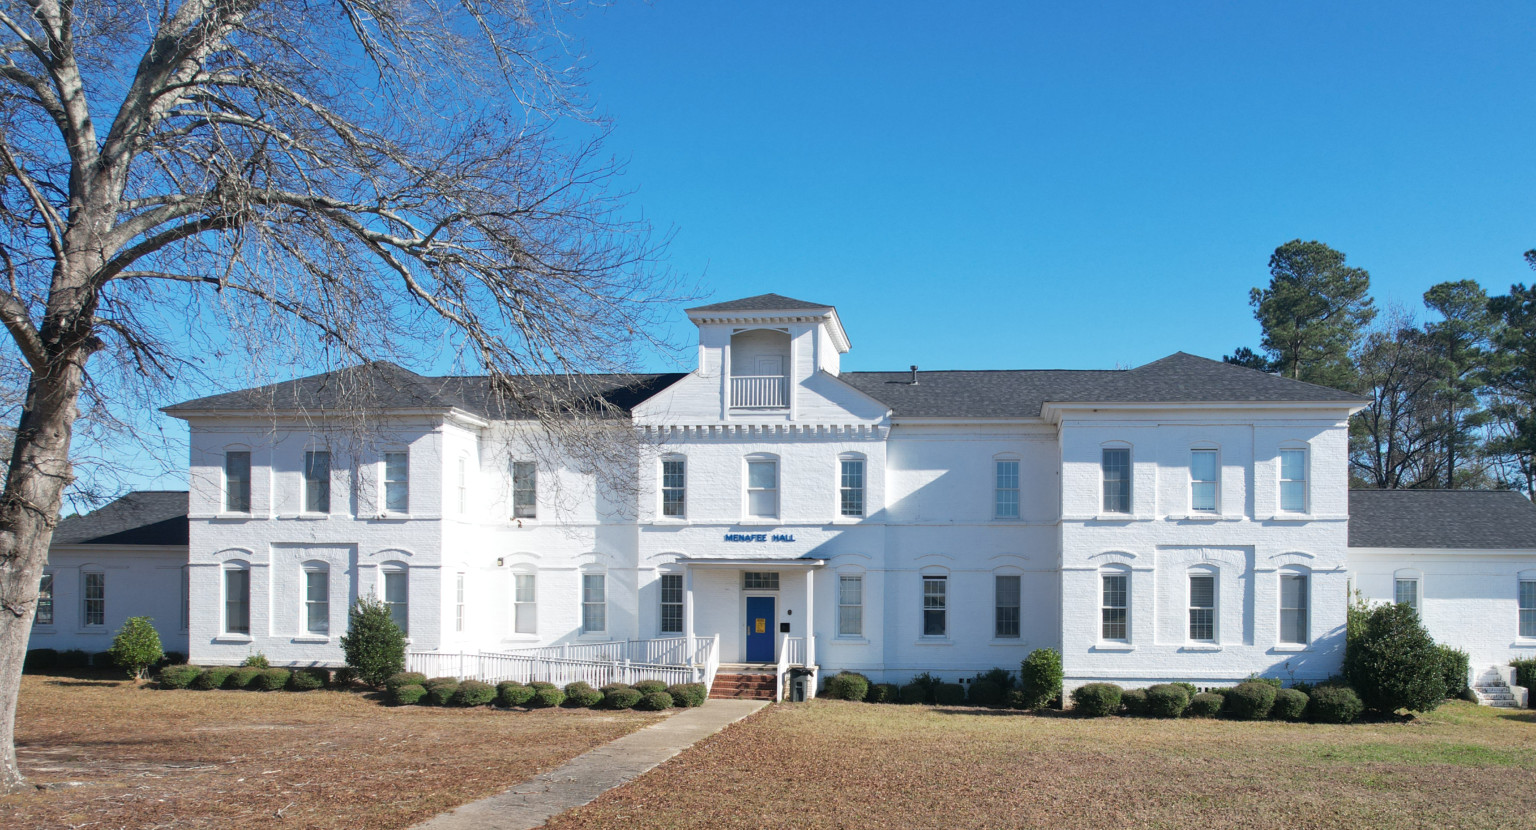 Menafee Hall at Voorhees College, an HBCU. A white 2 story building with central square turret and lookout over blue door